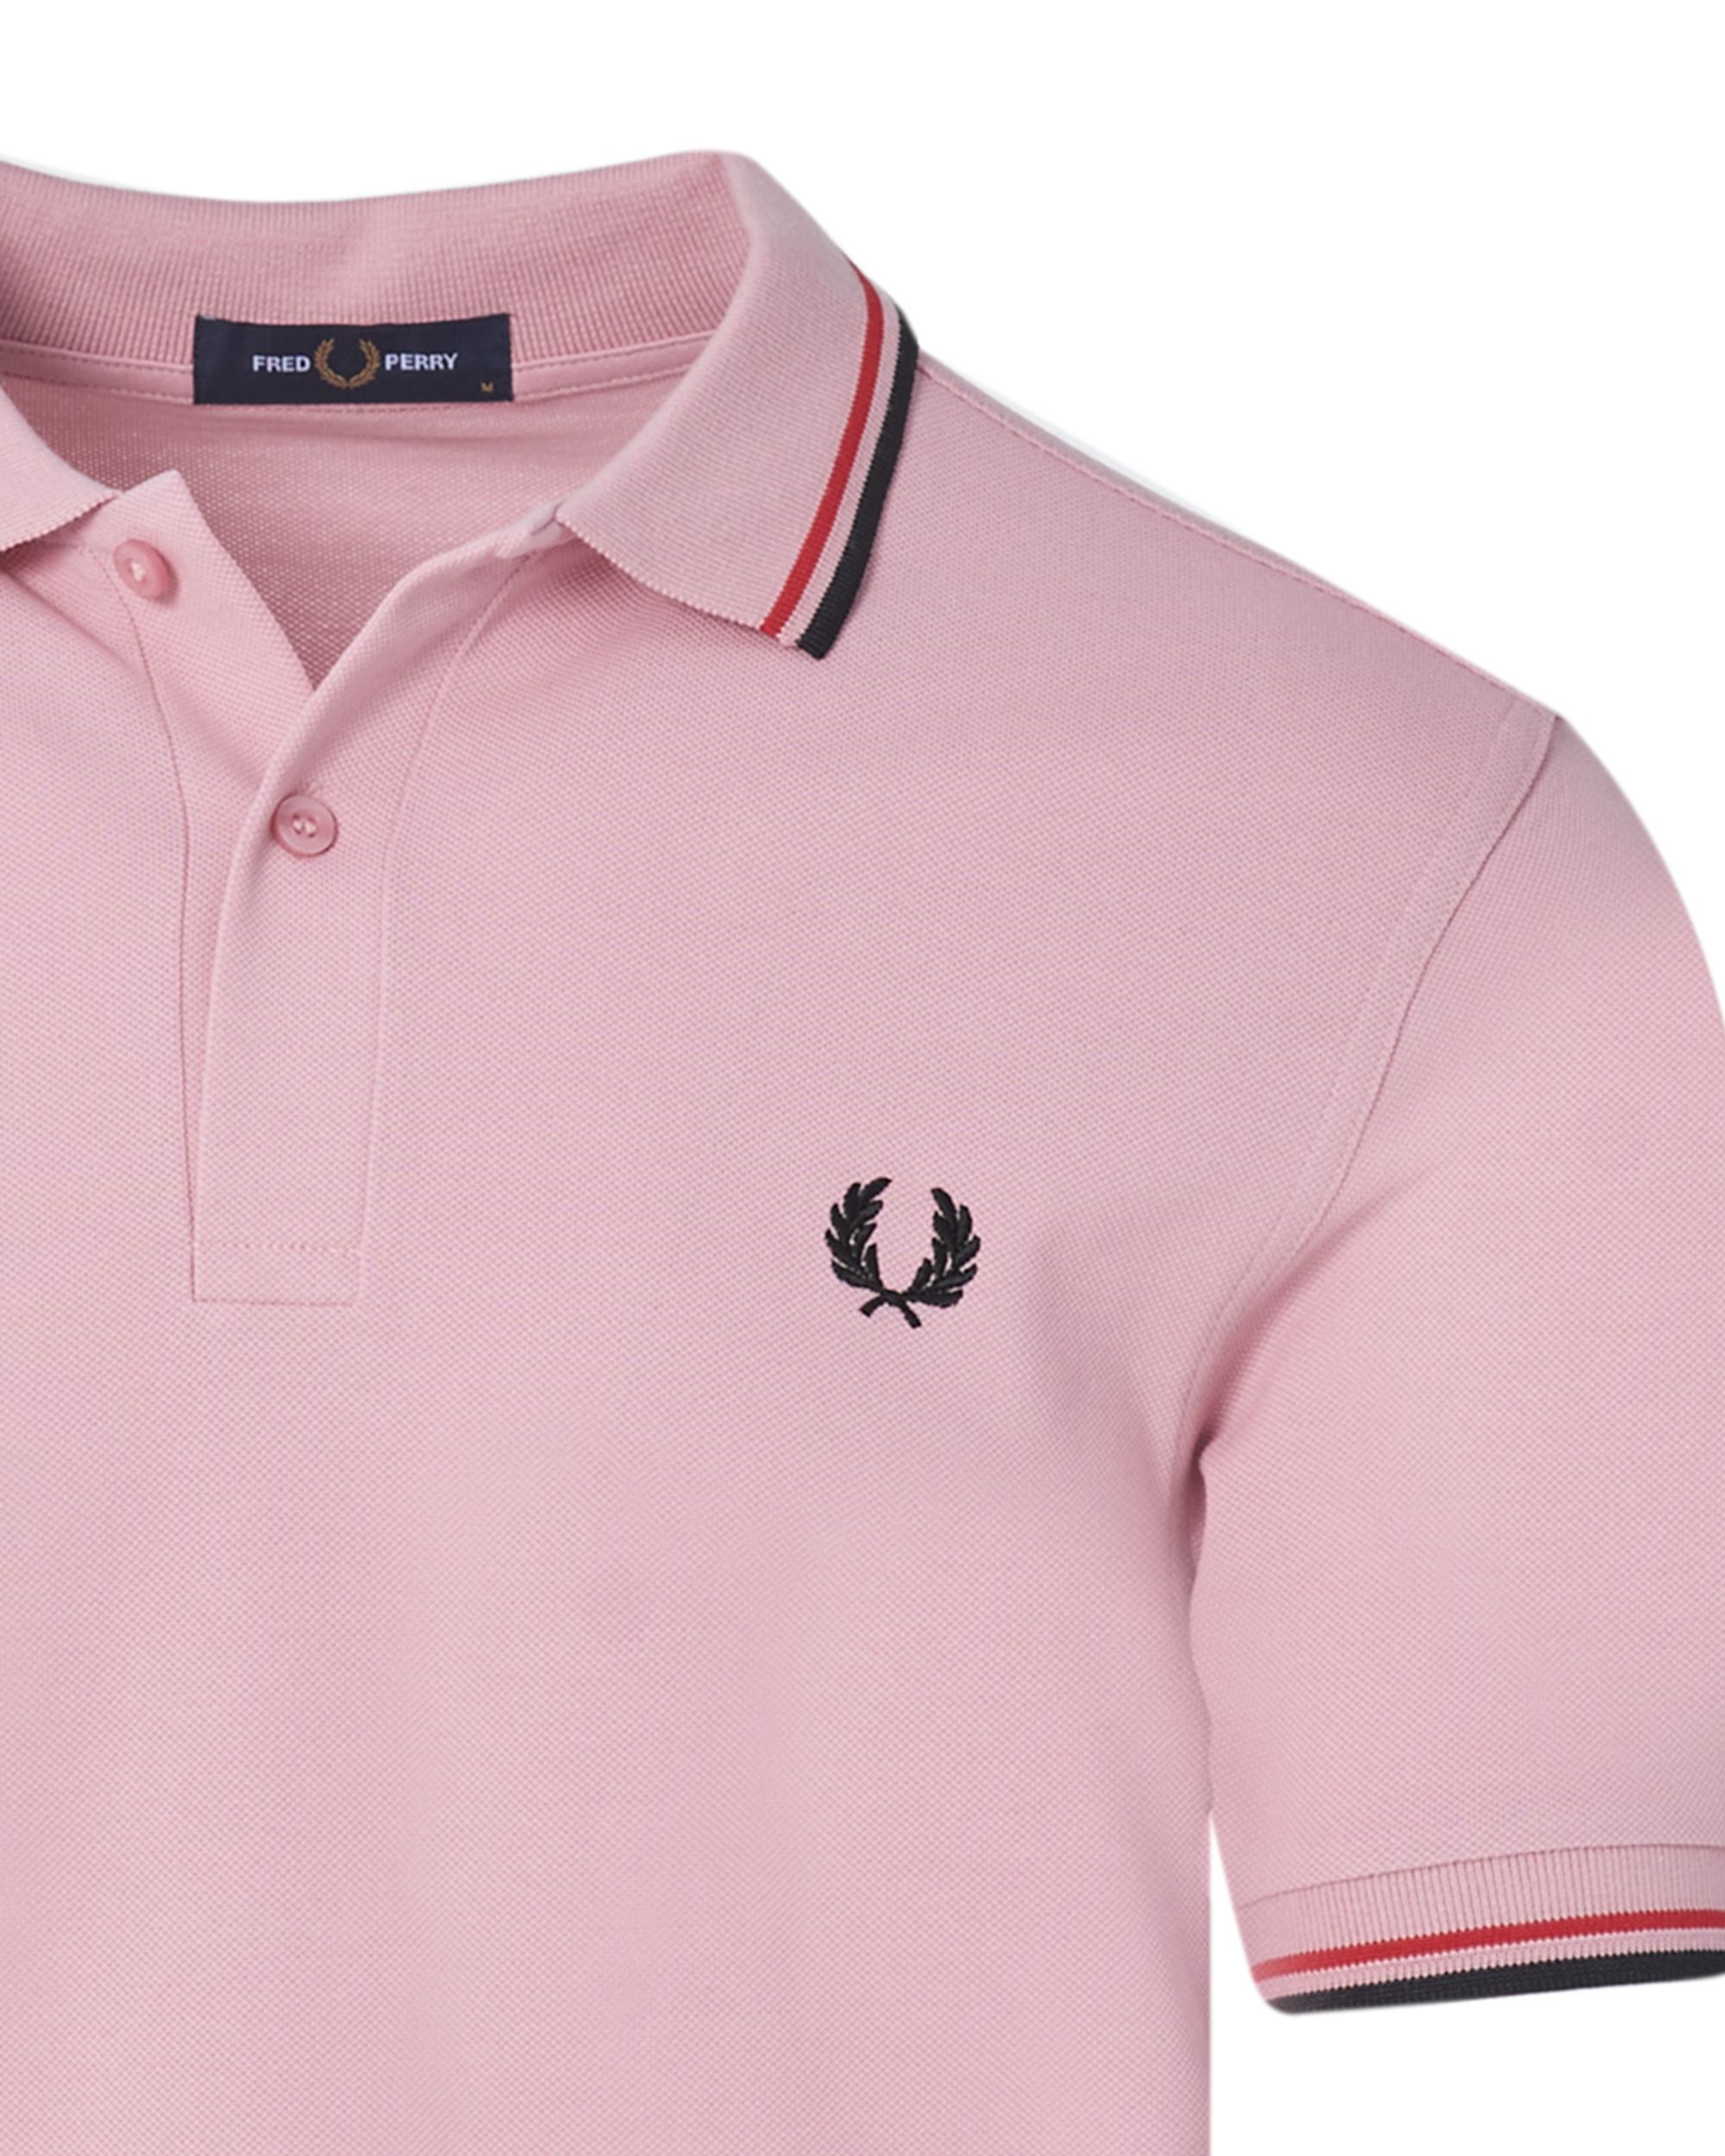 Fred Perry Polo KM Roze 083527-001-L